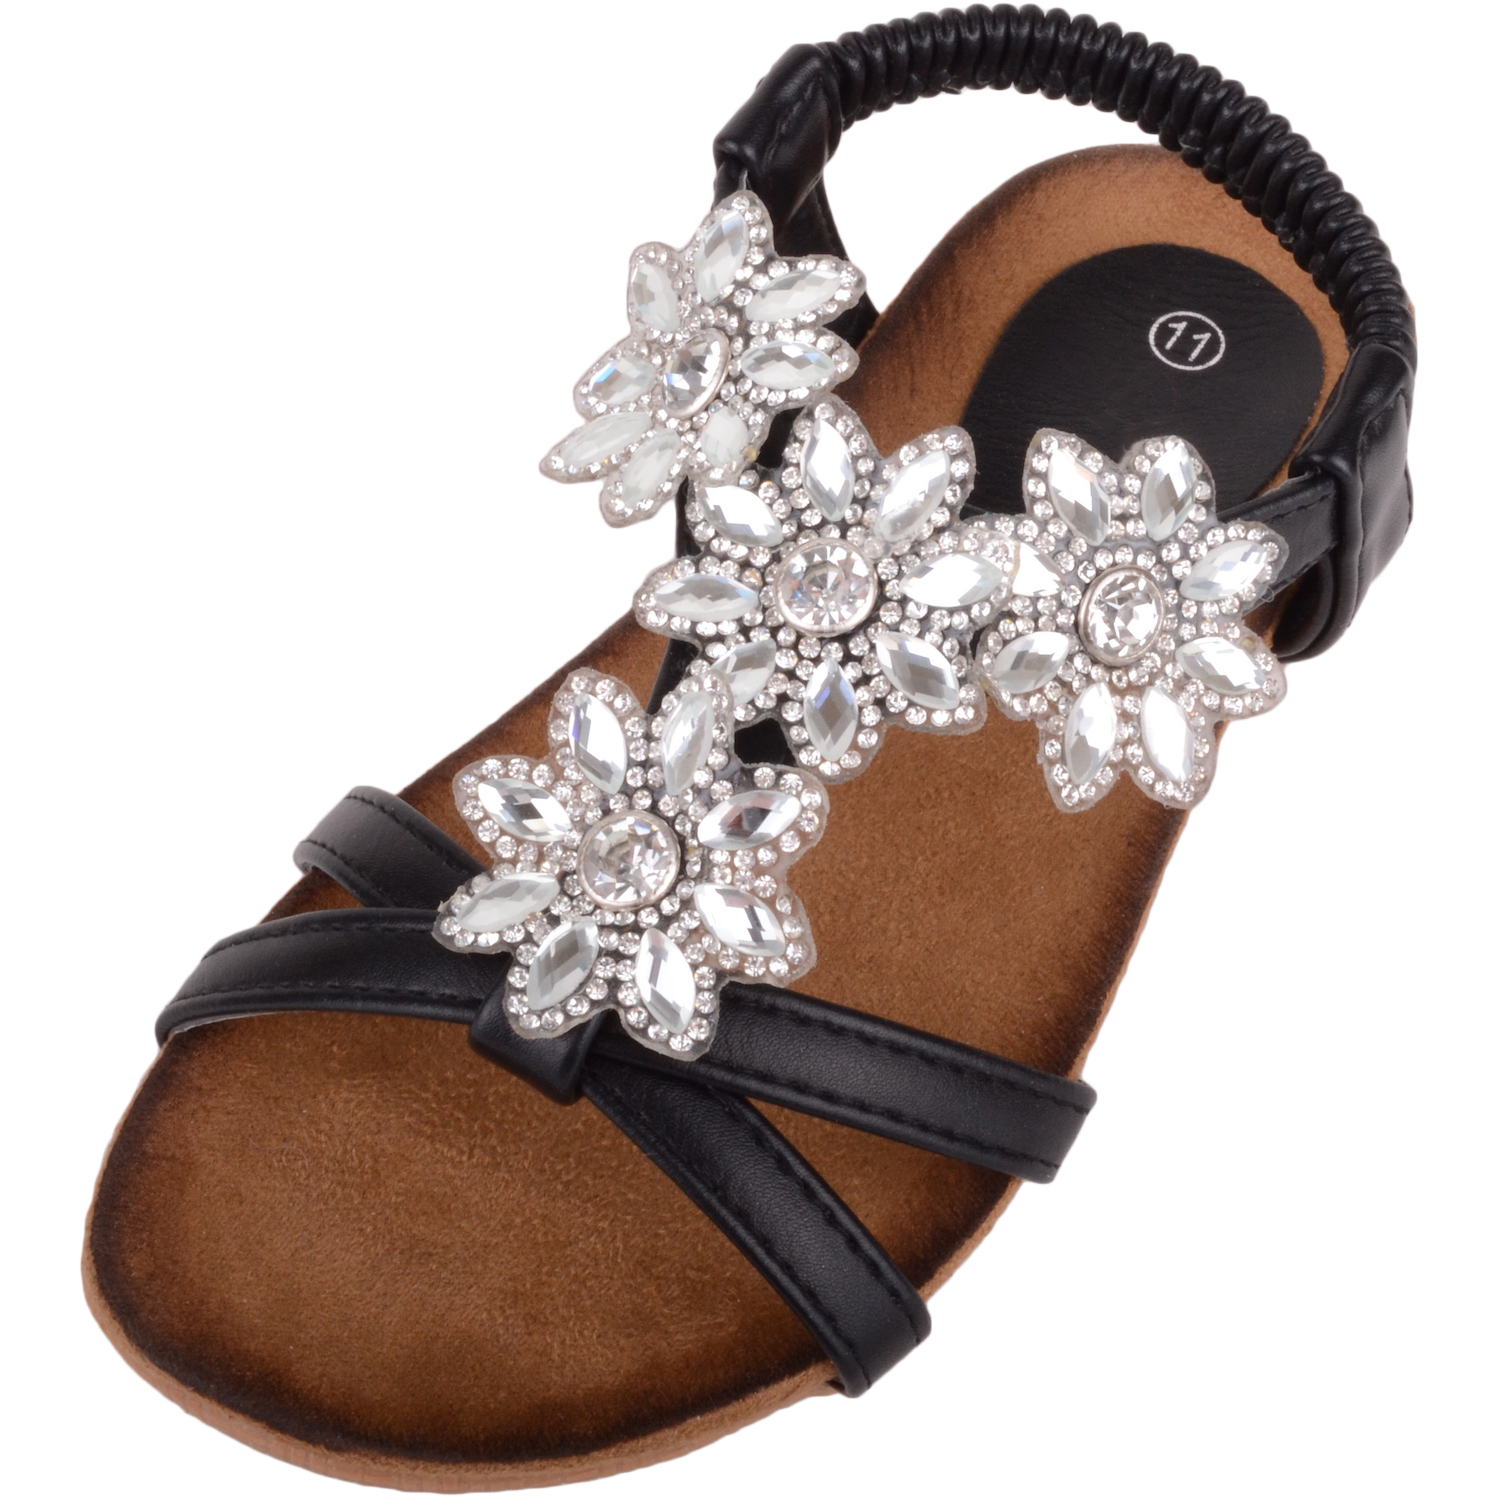 Absolute Footwear Childrens/Kids/Girls Summer/Holiday Sandals/Shoes ...